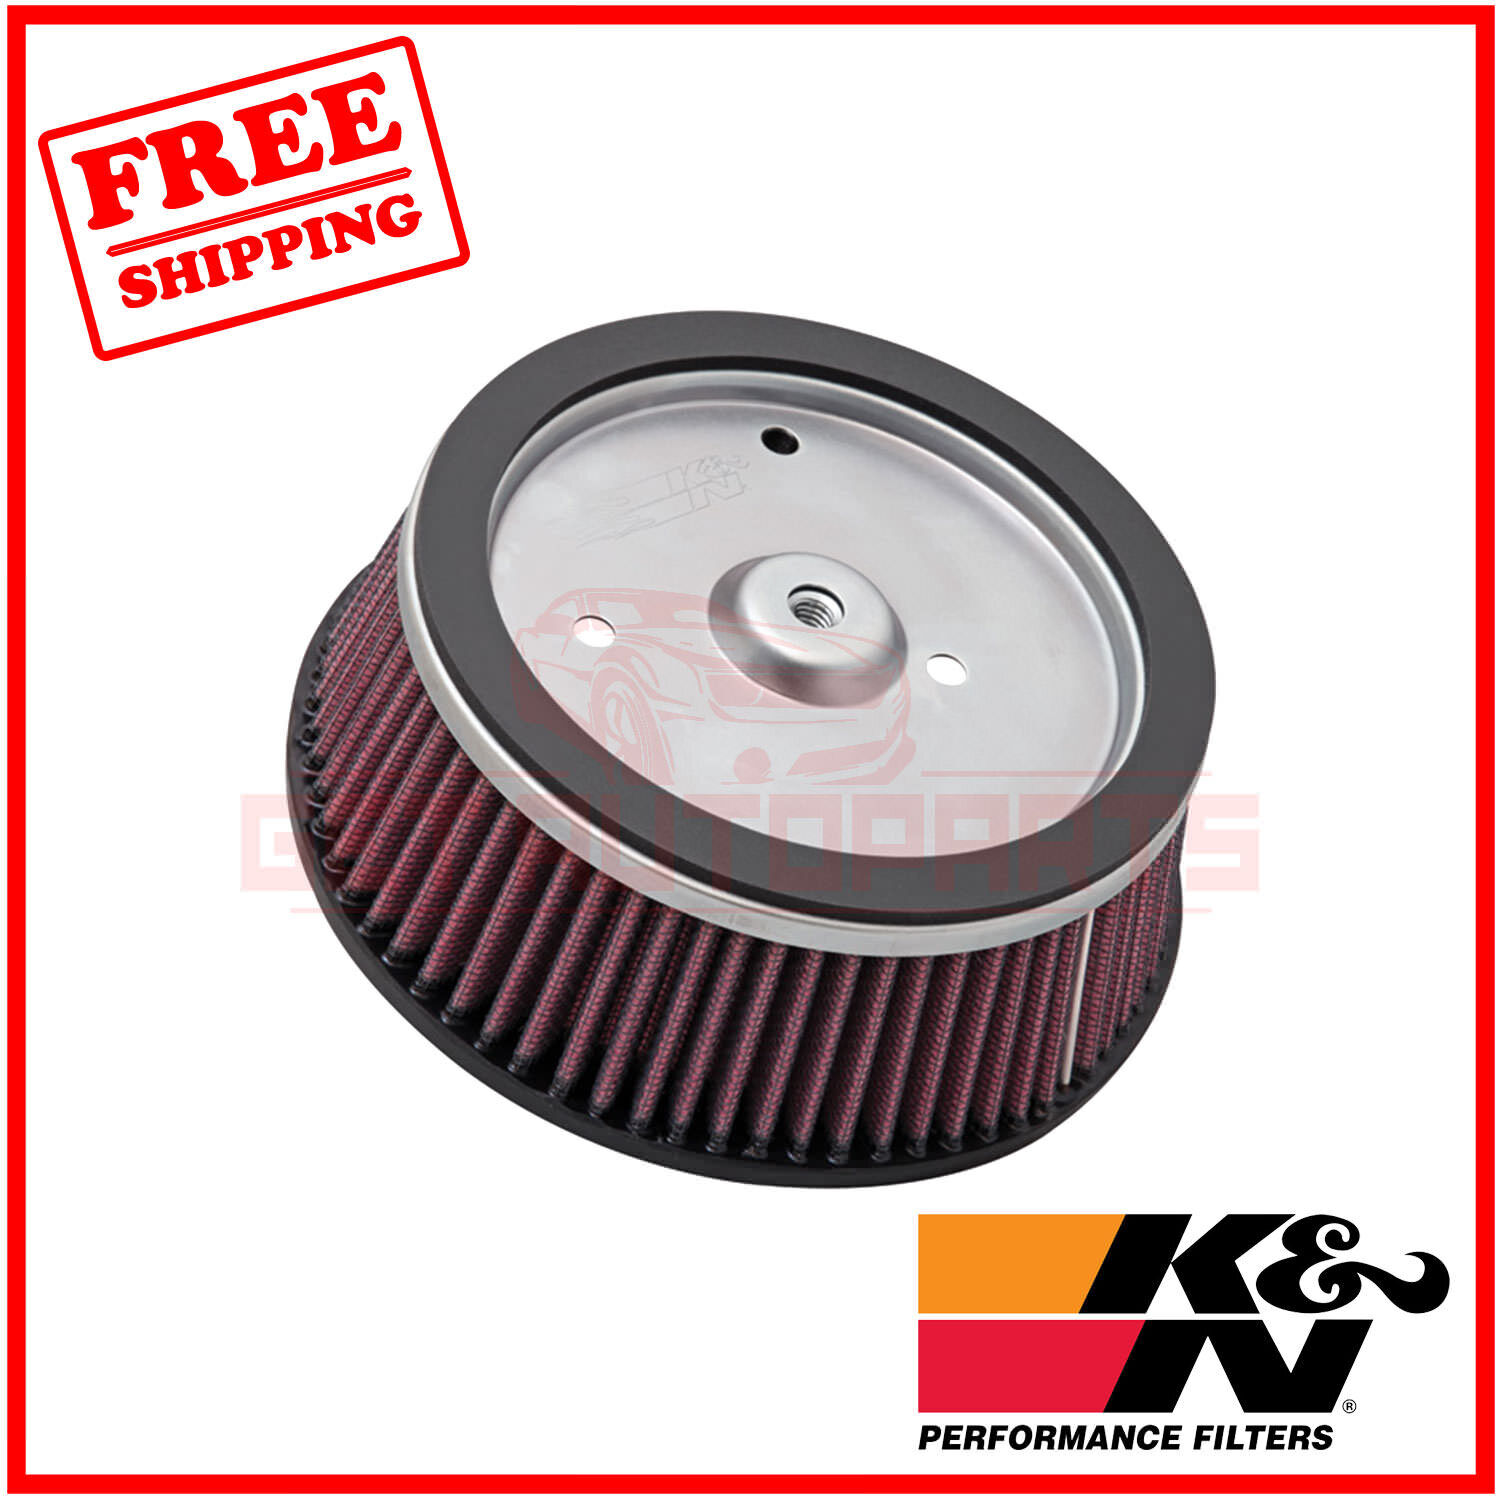 K&N Replacement Air Filter fits Harley Davidson FLHTI Electra Glide 2003-2006